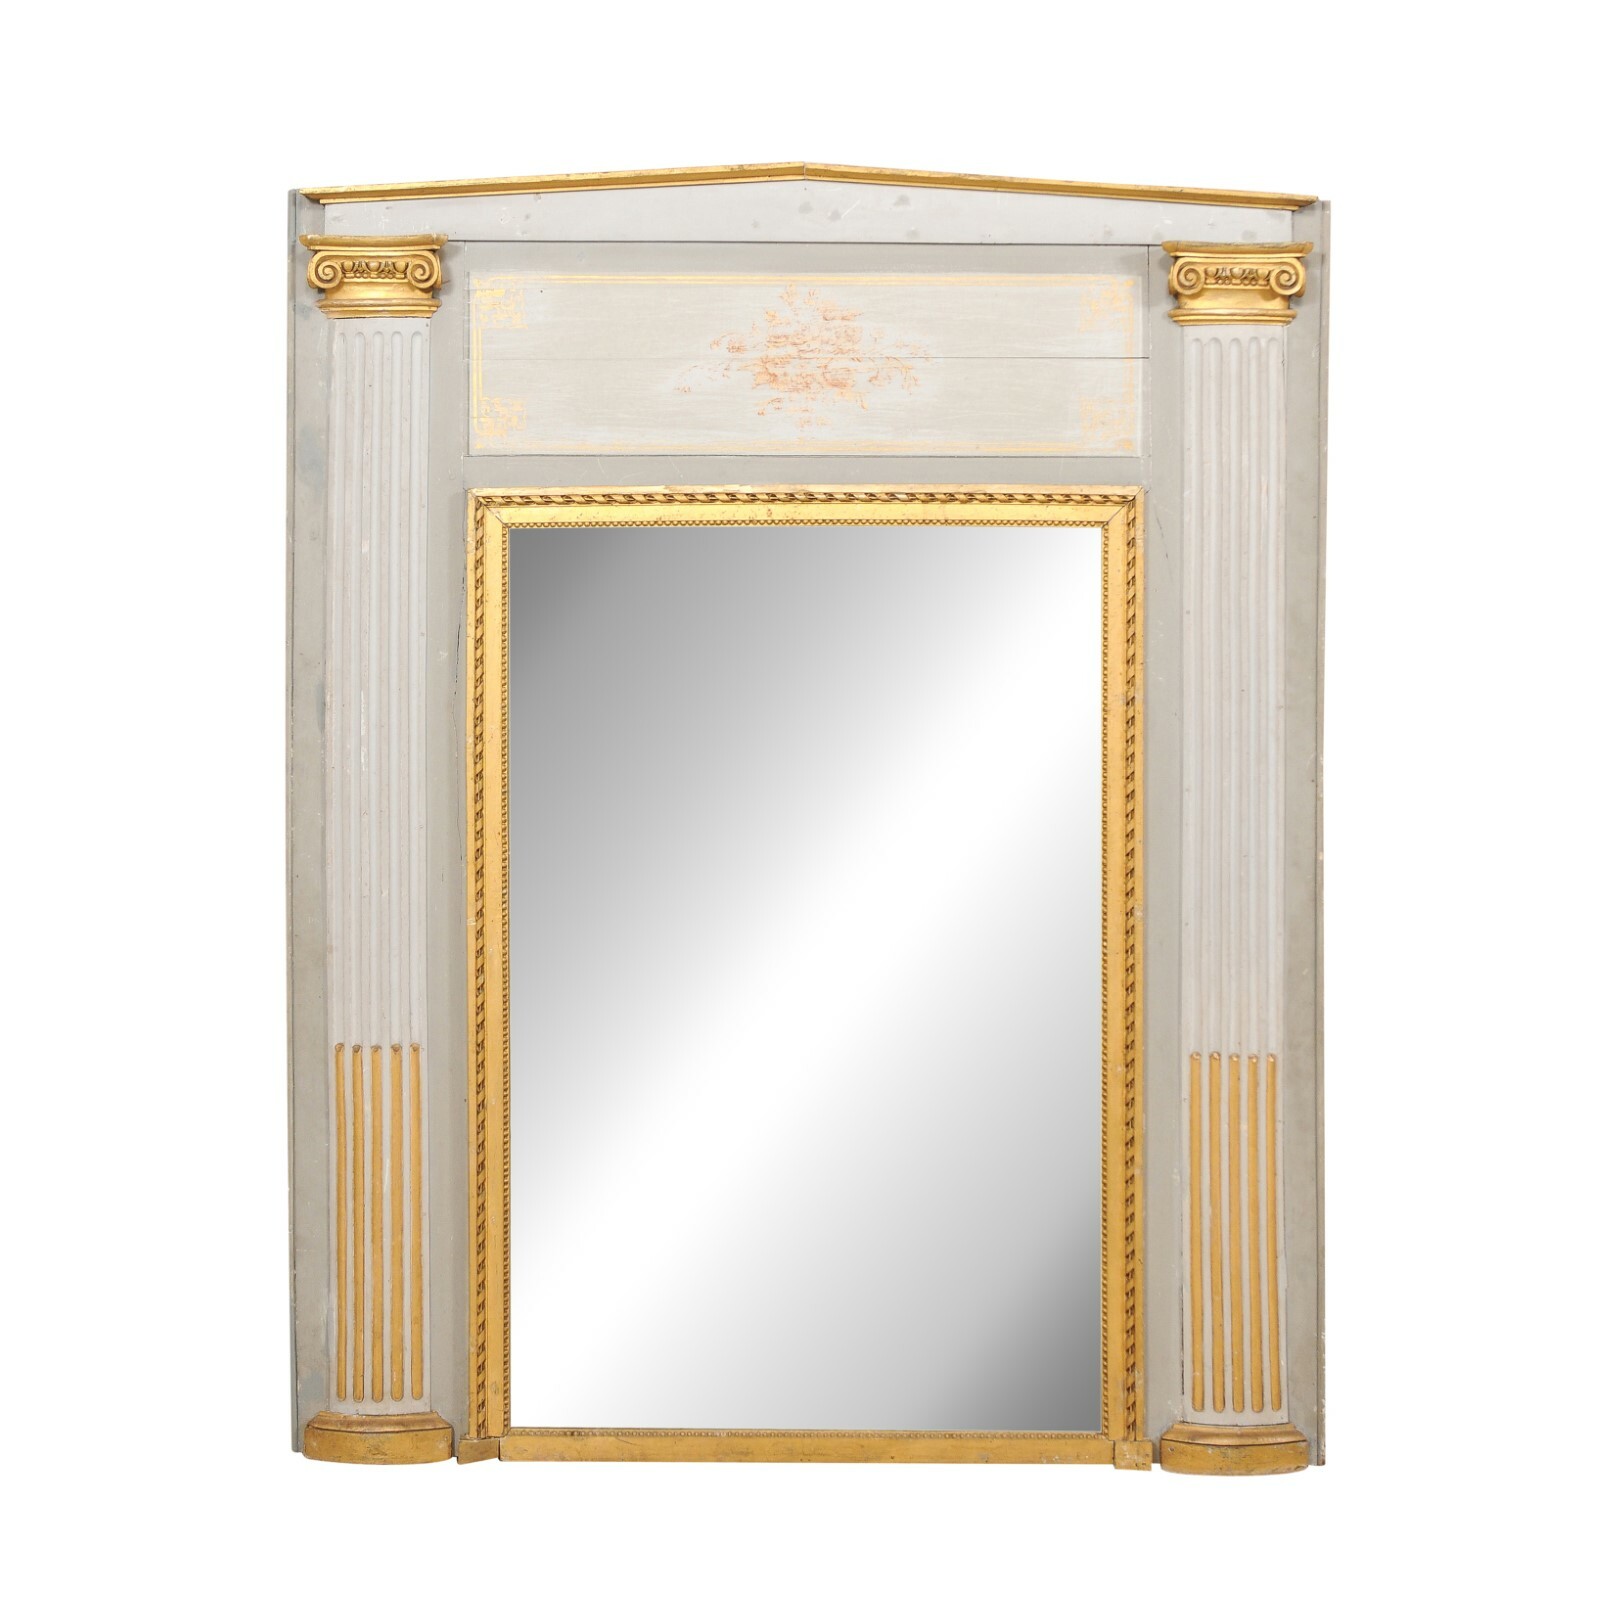 French 5.5' Tall Overmantle Mirror, 19th C.